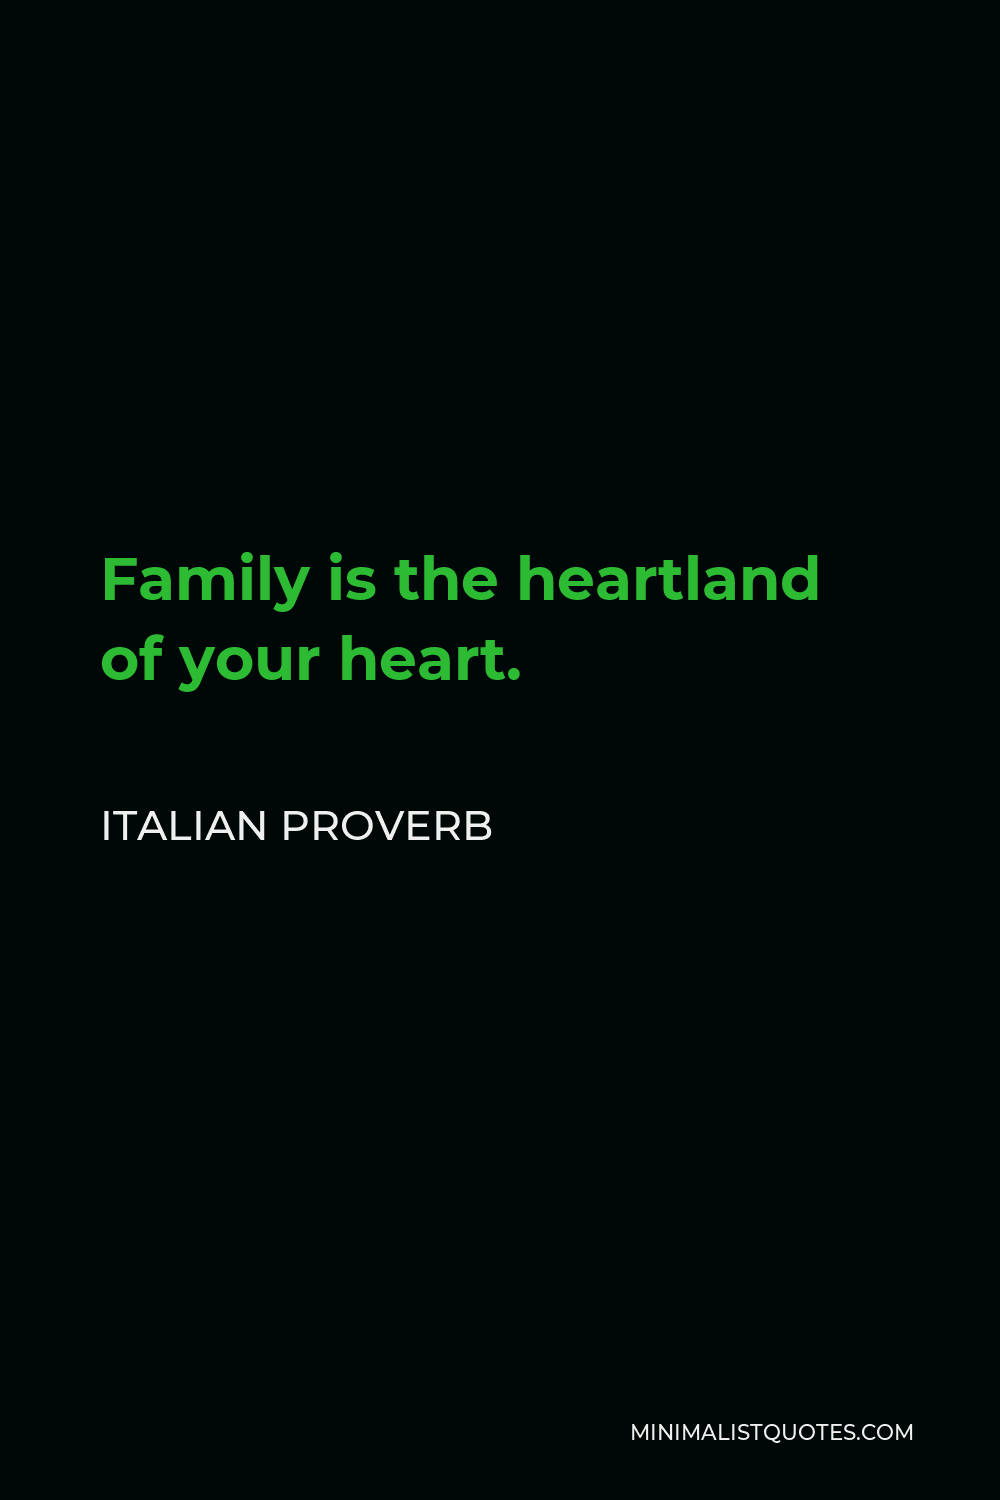 Italian Proverb Quote - Family is the heartland of your heart.